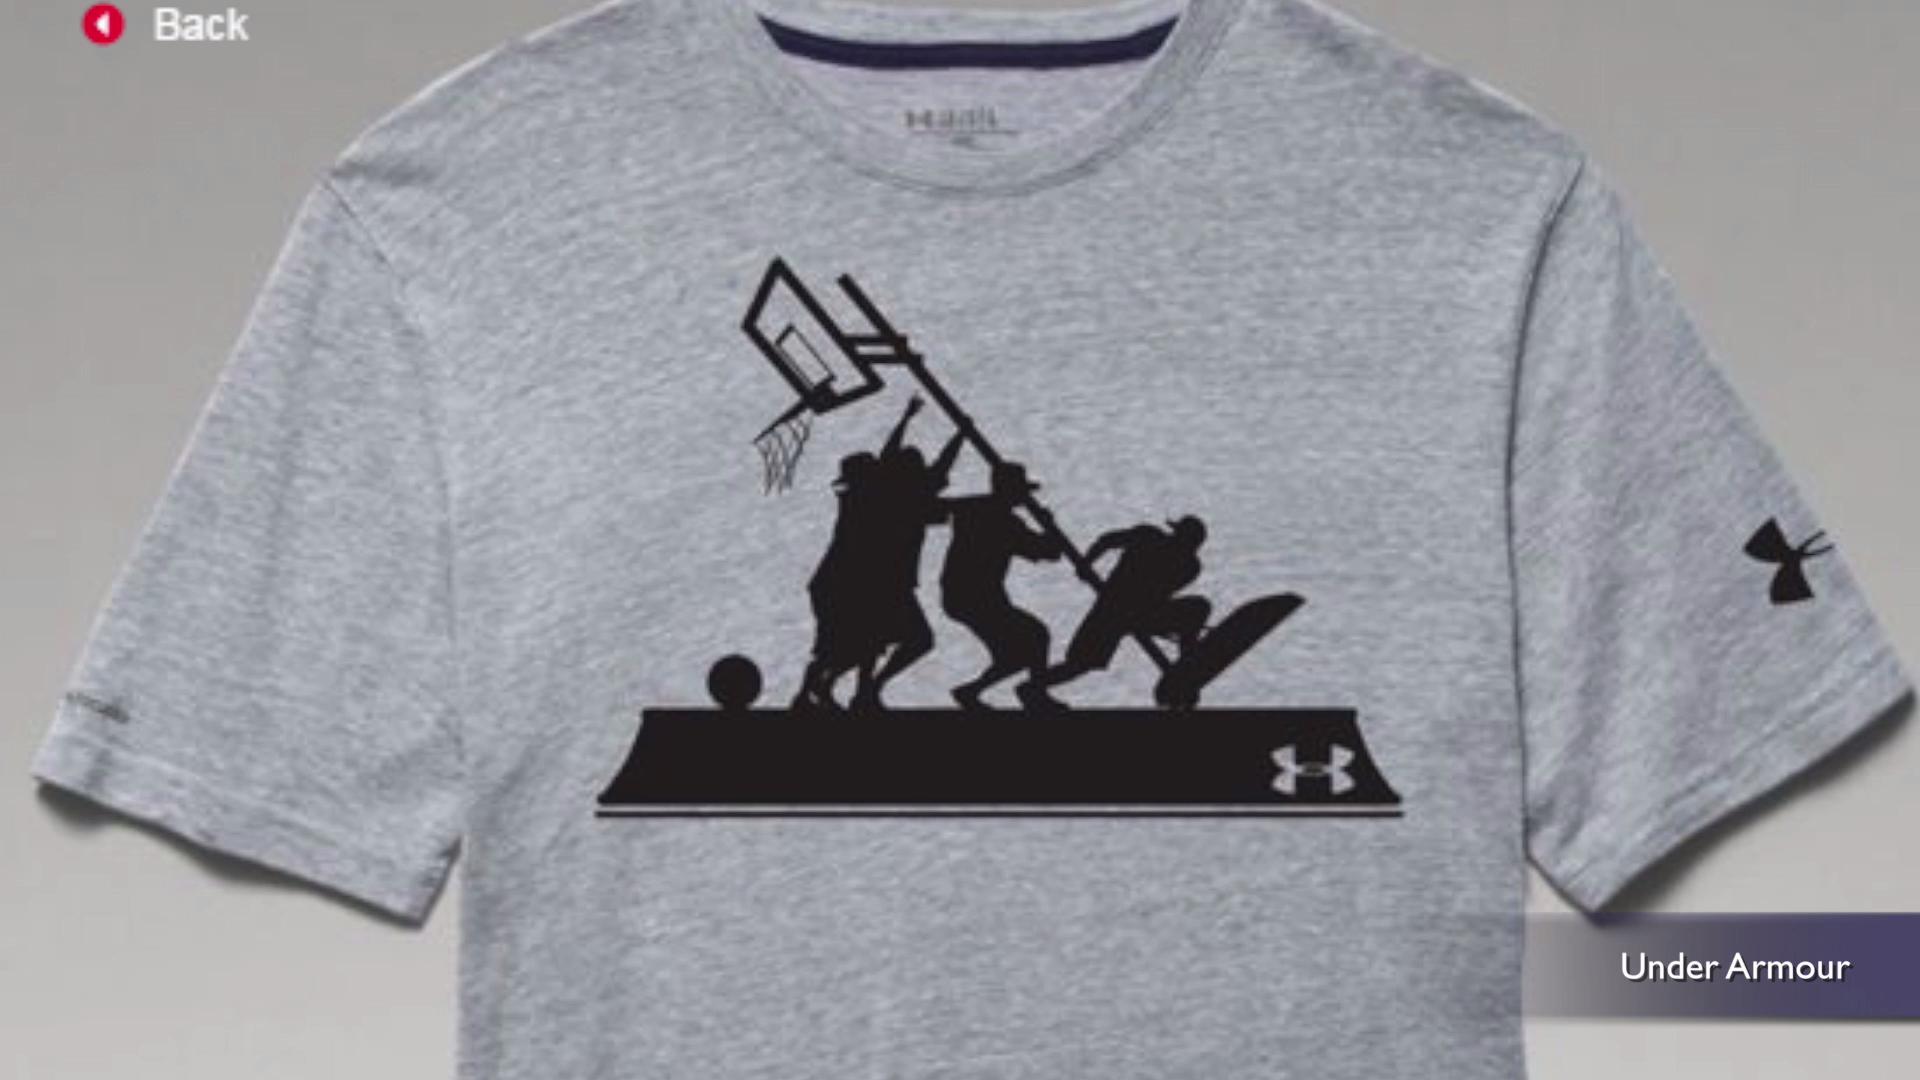 Buy under armour type shirts - 62% OFF!